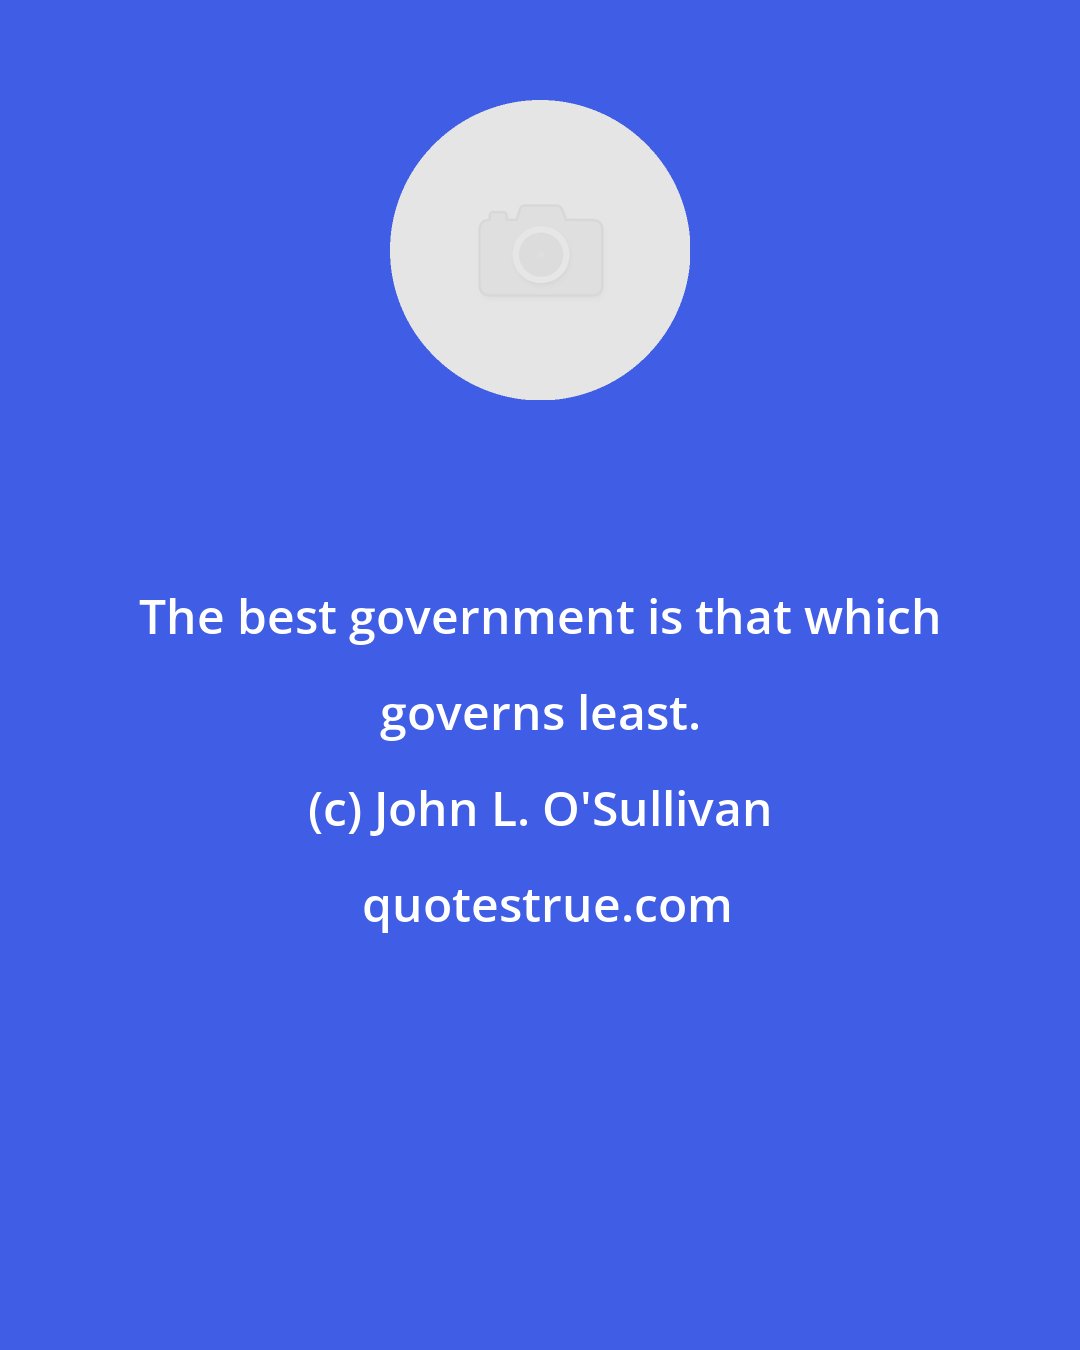 John L. O'Sullivan: The best government is that which governs least.